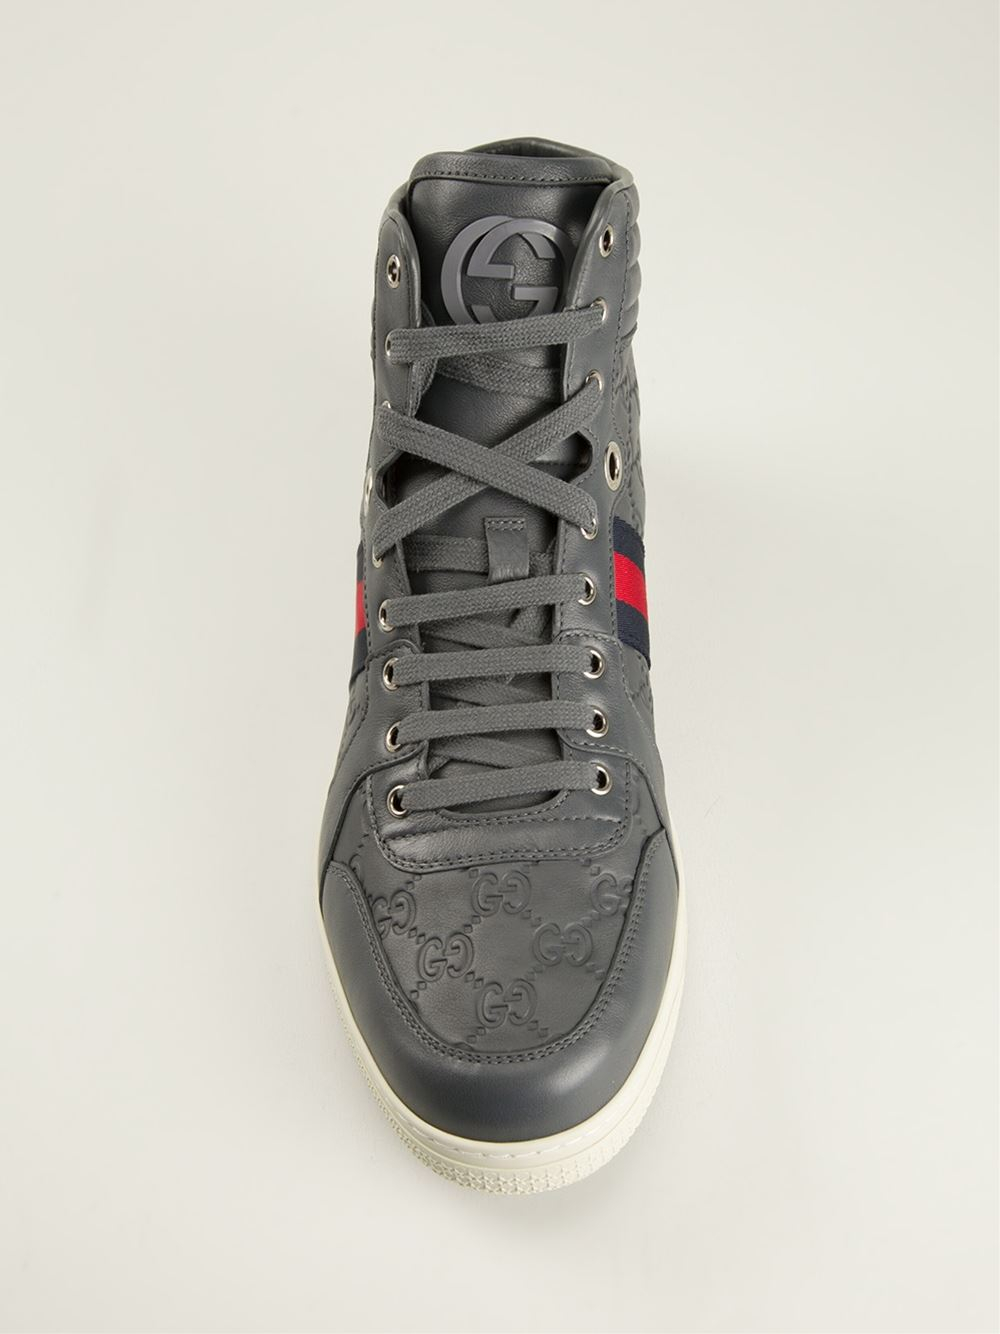 Gucci Monogram Pattern Leather Sneakers - Grey Sneakers, Shoes - GUC1370099